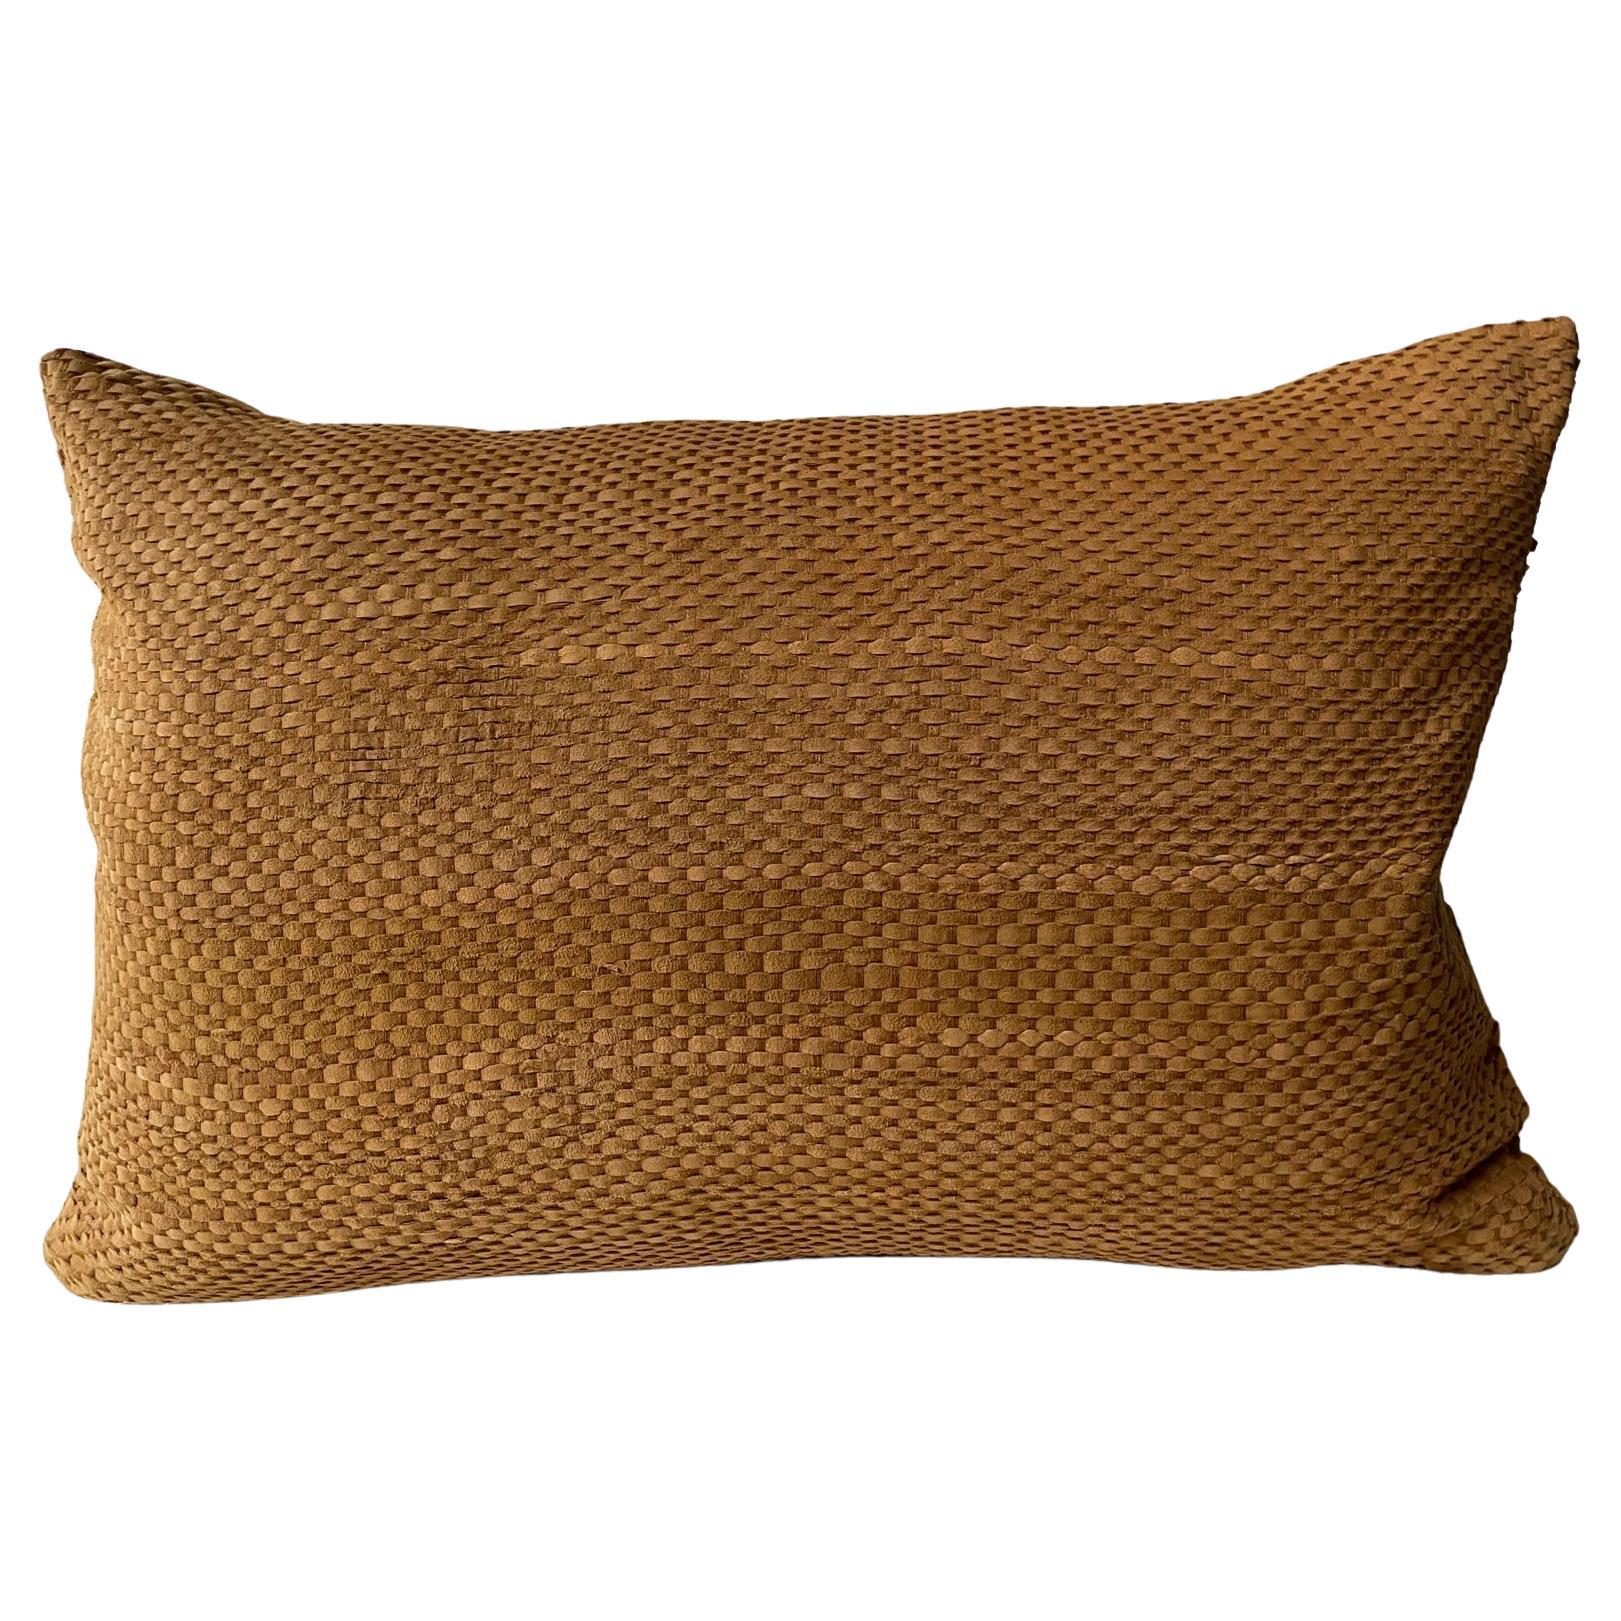 Hand Woven Suede Cushion Colour GInger Oblong Shaped